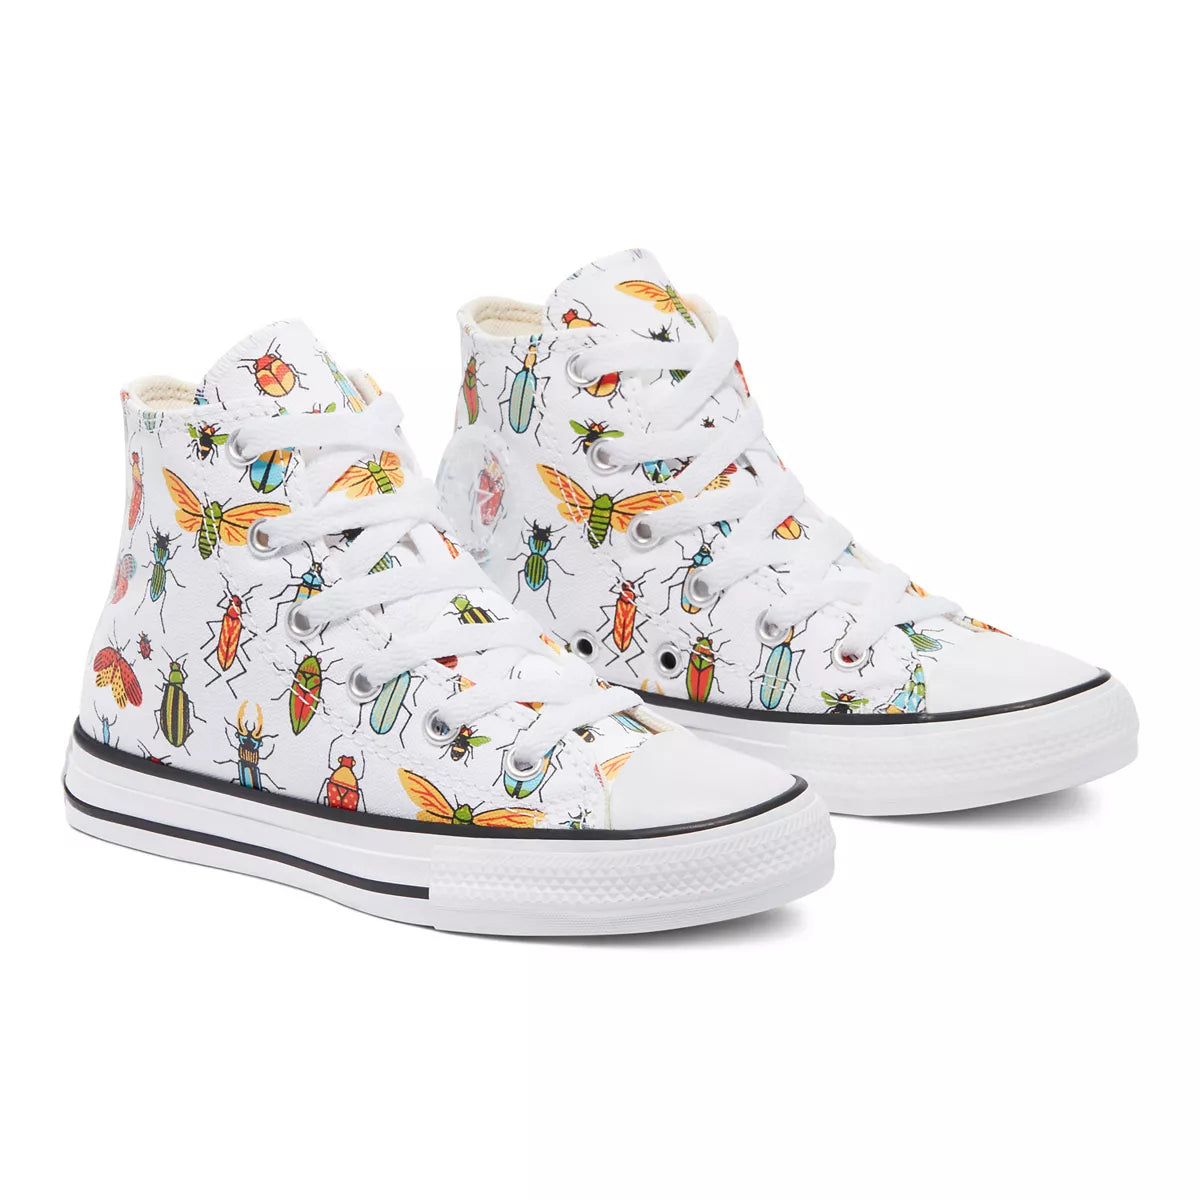 Converse Chuck Taylor High Top Kids Bugged Out White